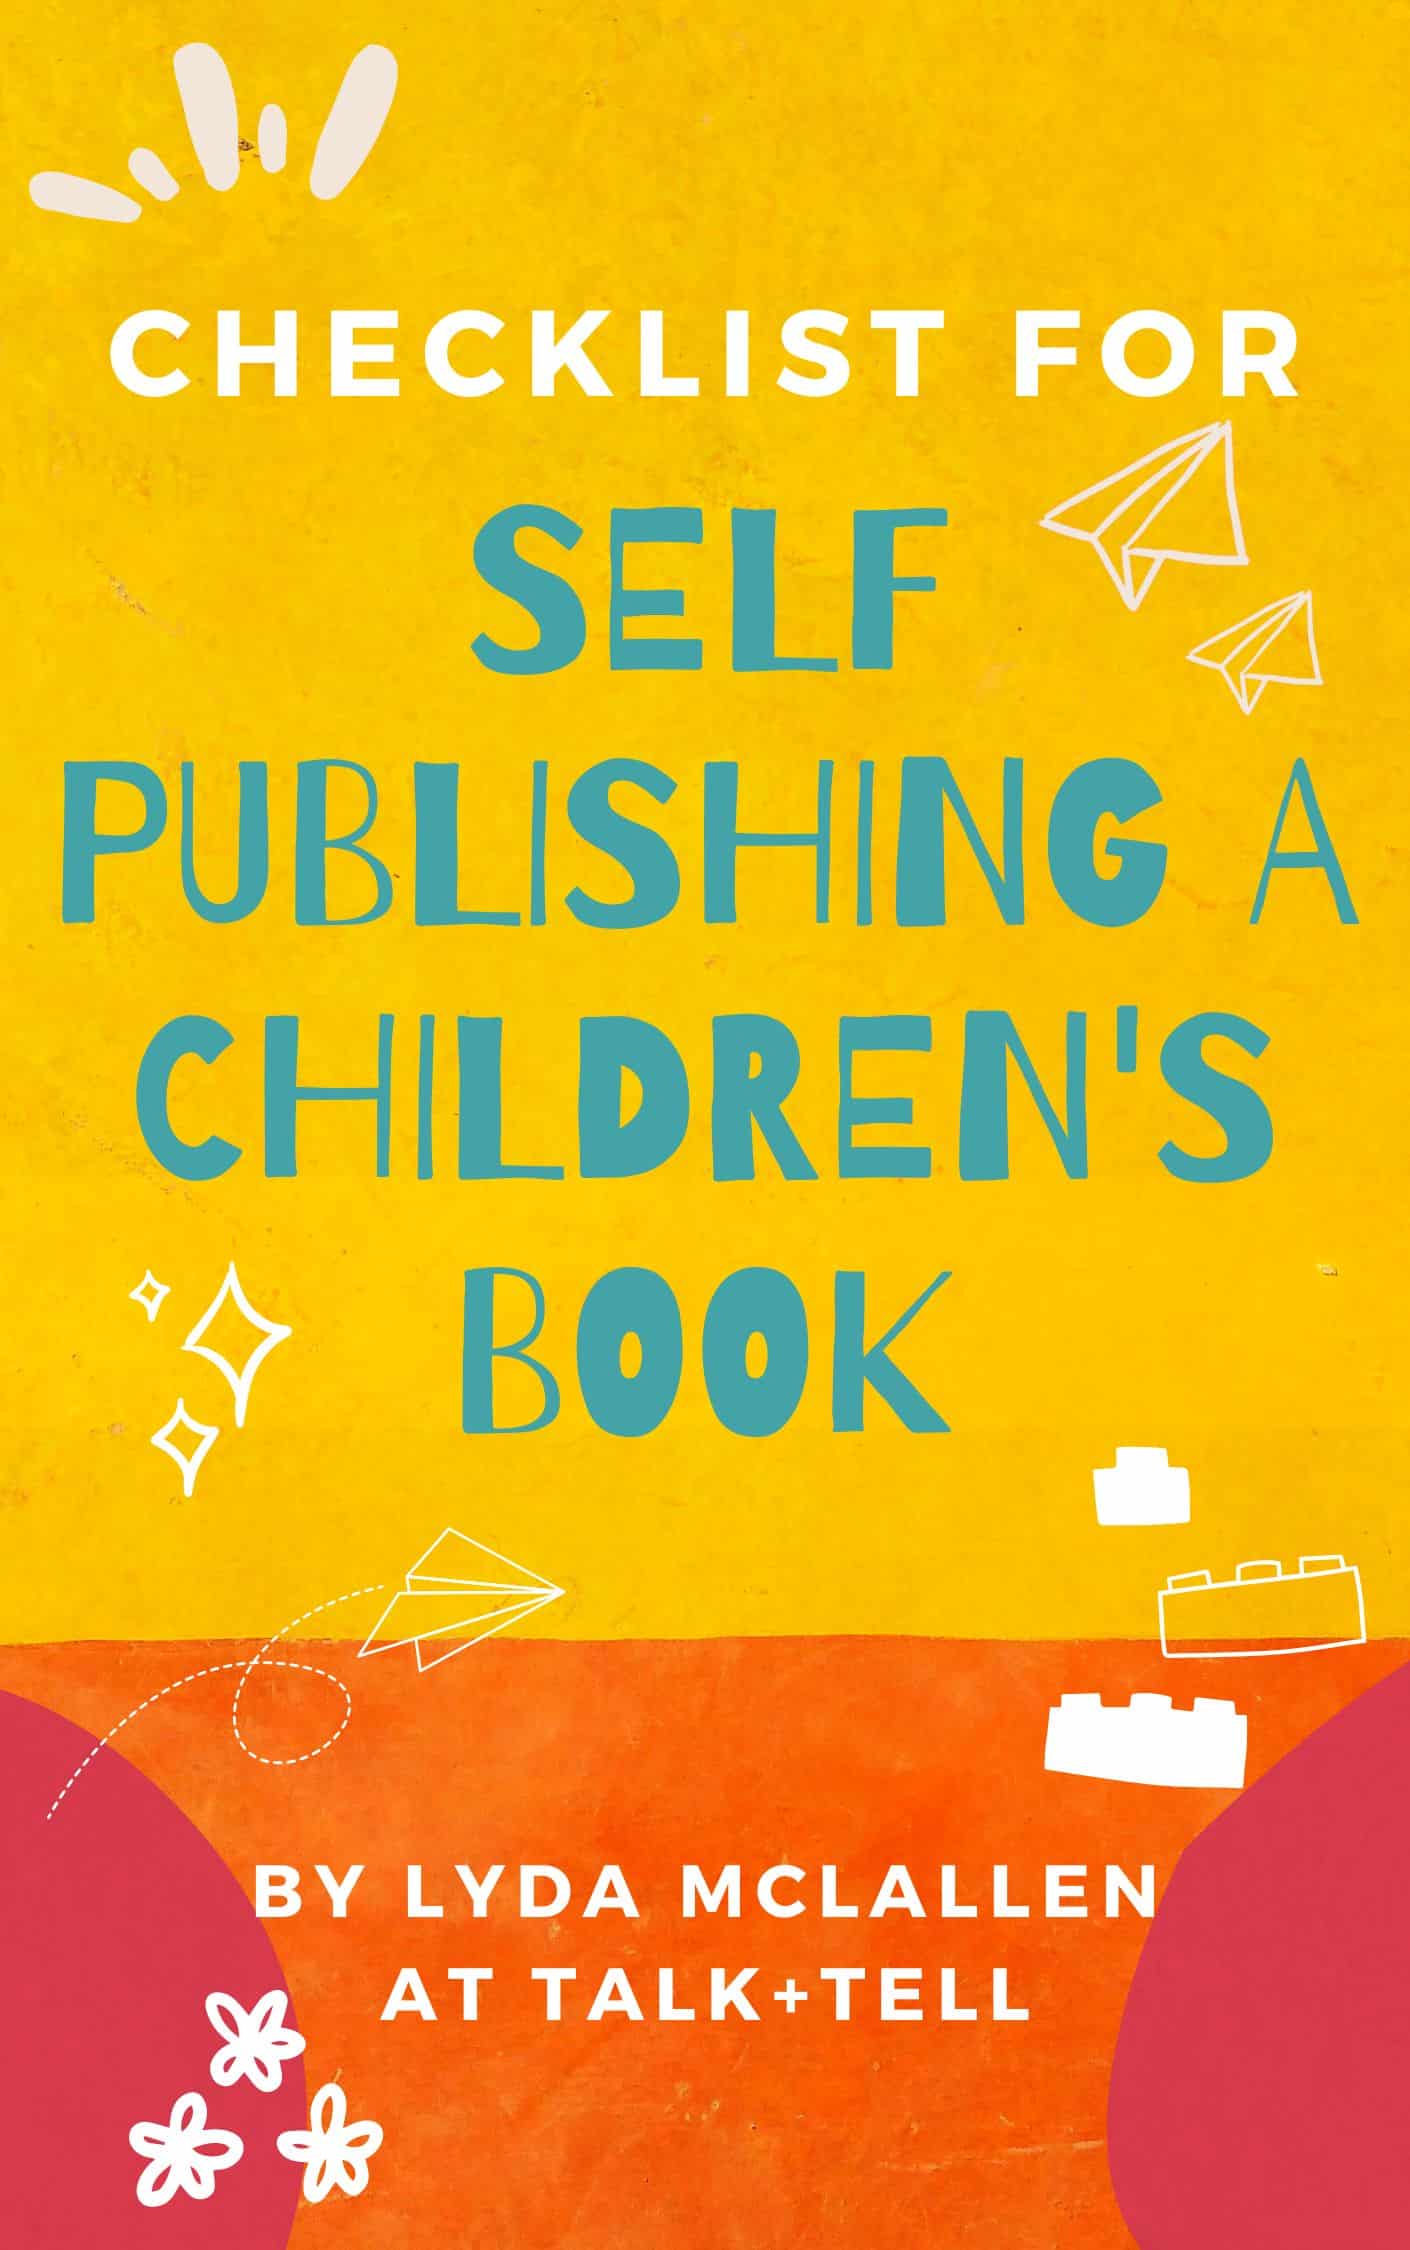 how-to-self-publish-a-children-s-book-guide-talk-tell-book